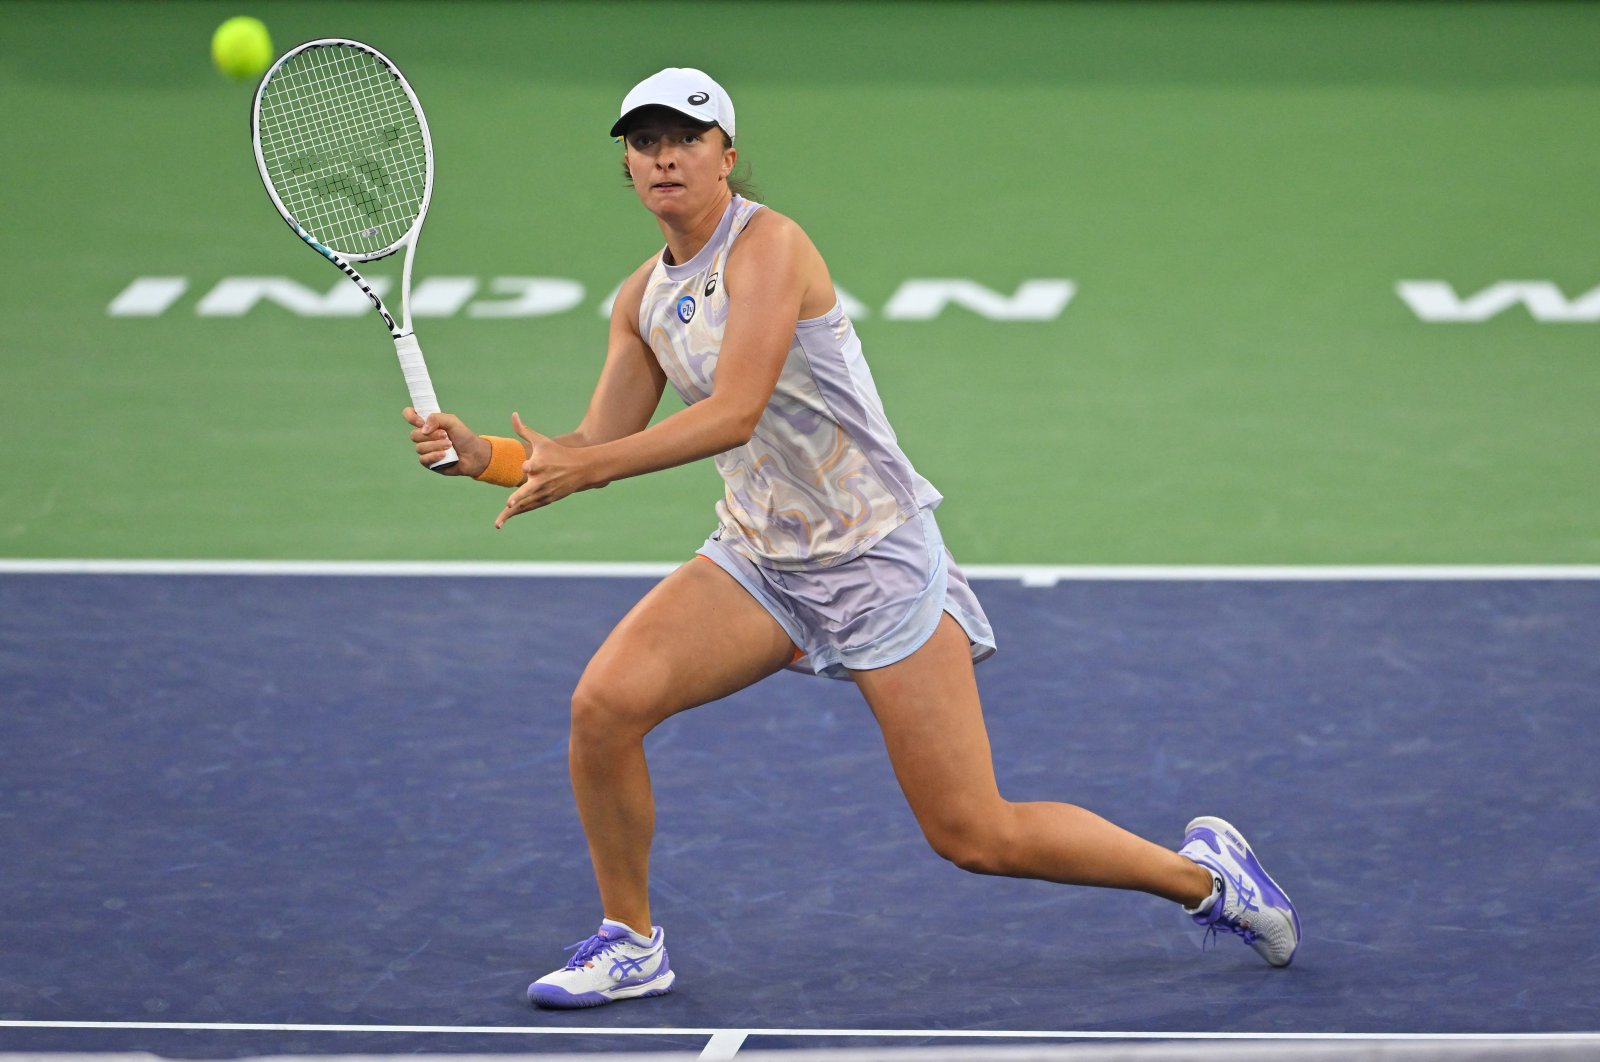 Polish Iga Swiatek hits a shot as she defeated Canadian Bianca Andreescu in her third round match at the BNP Paribas Open at the Indian Wells Tennis Garden, Indian Wells, US., Mar 13, 2023. (Reuters Photo)